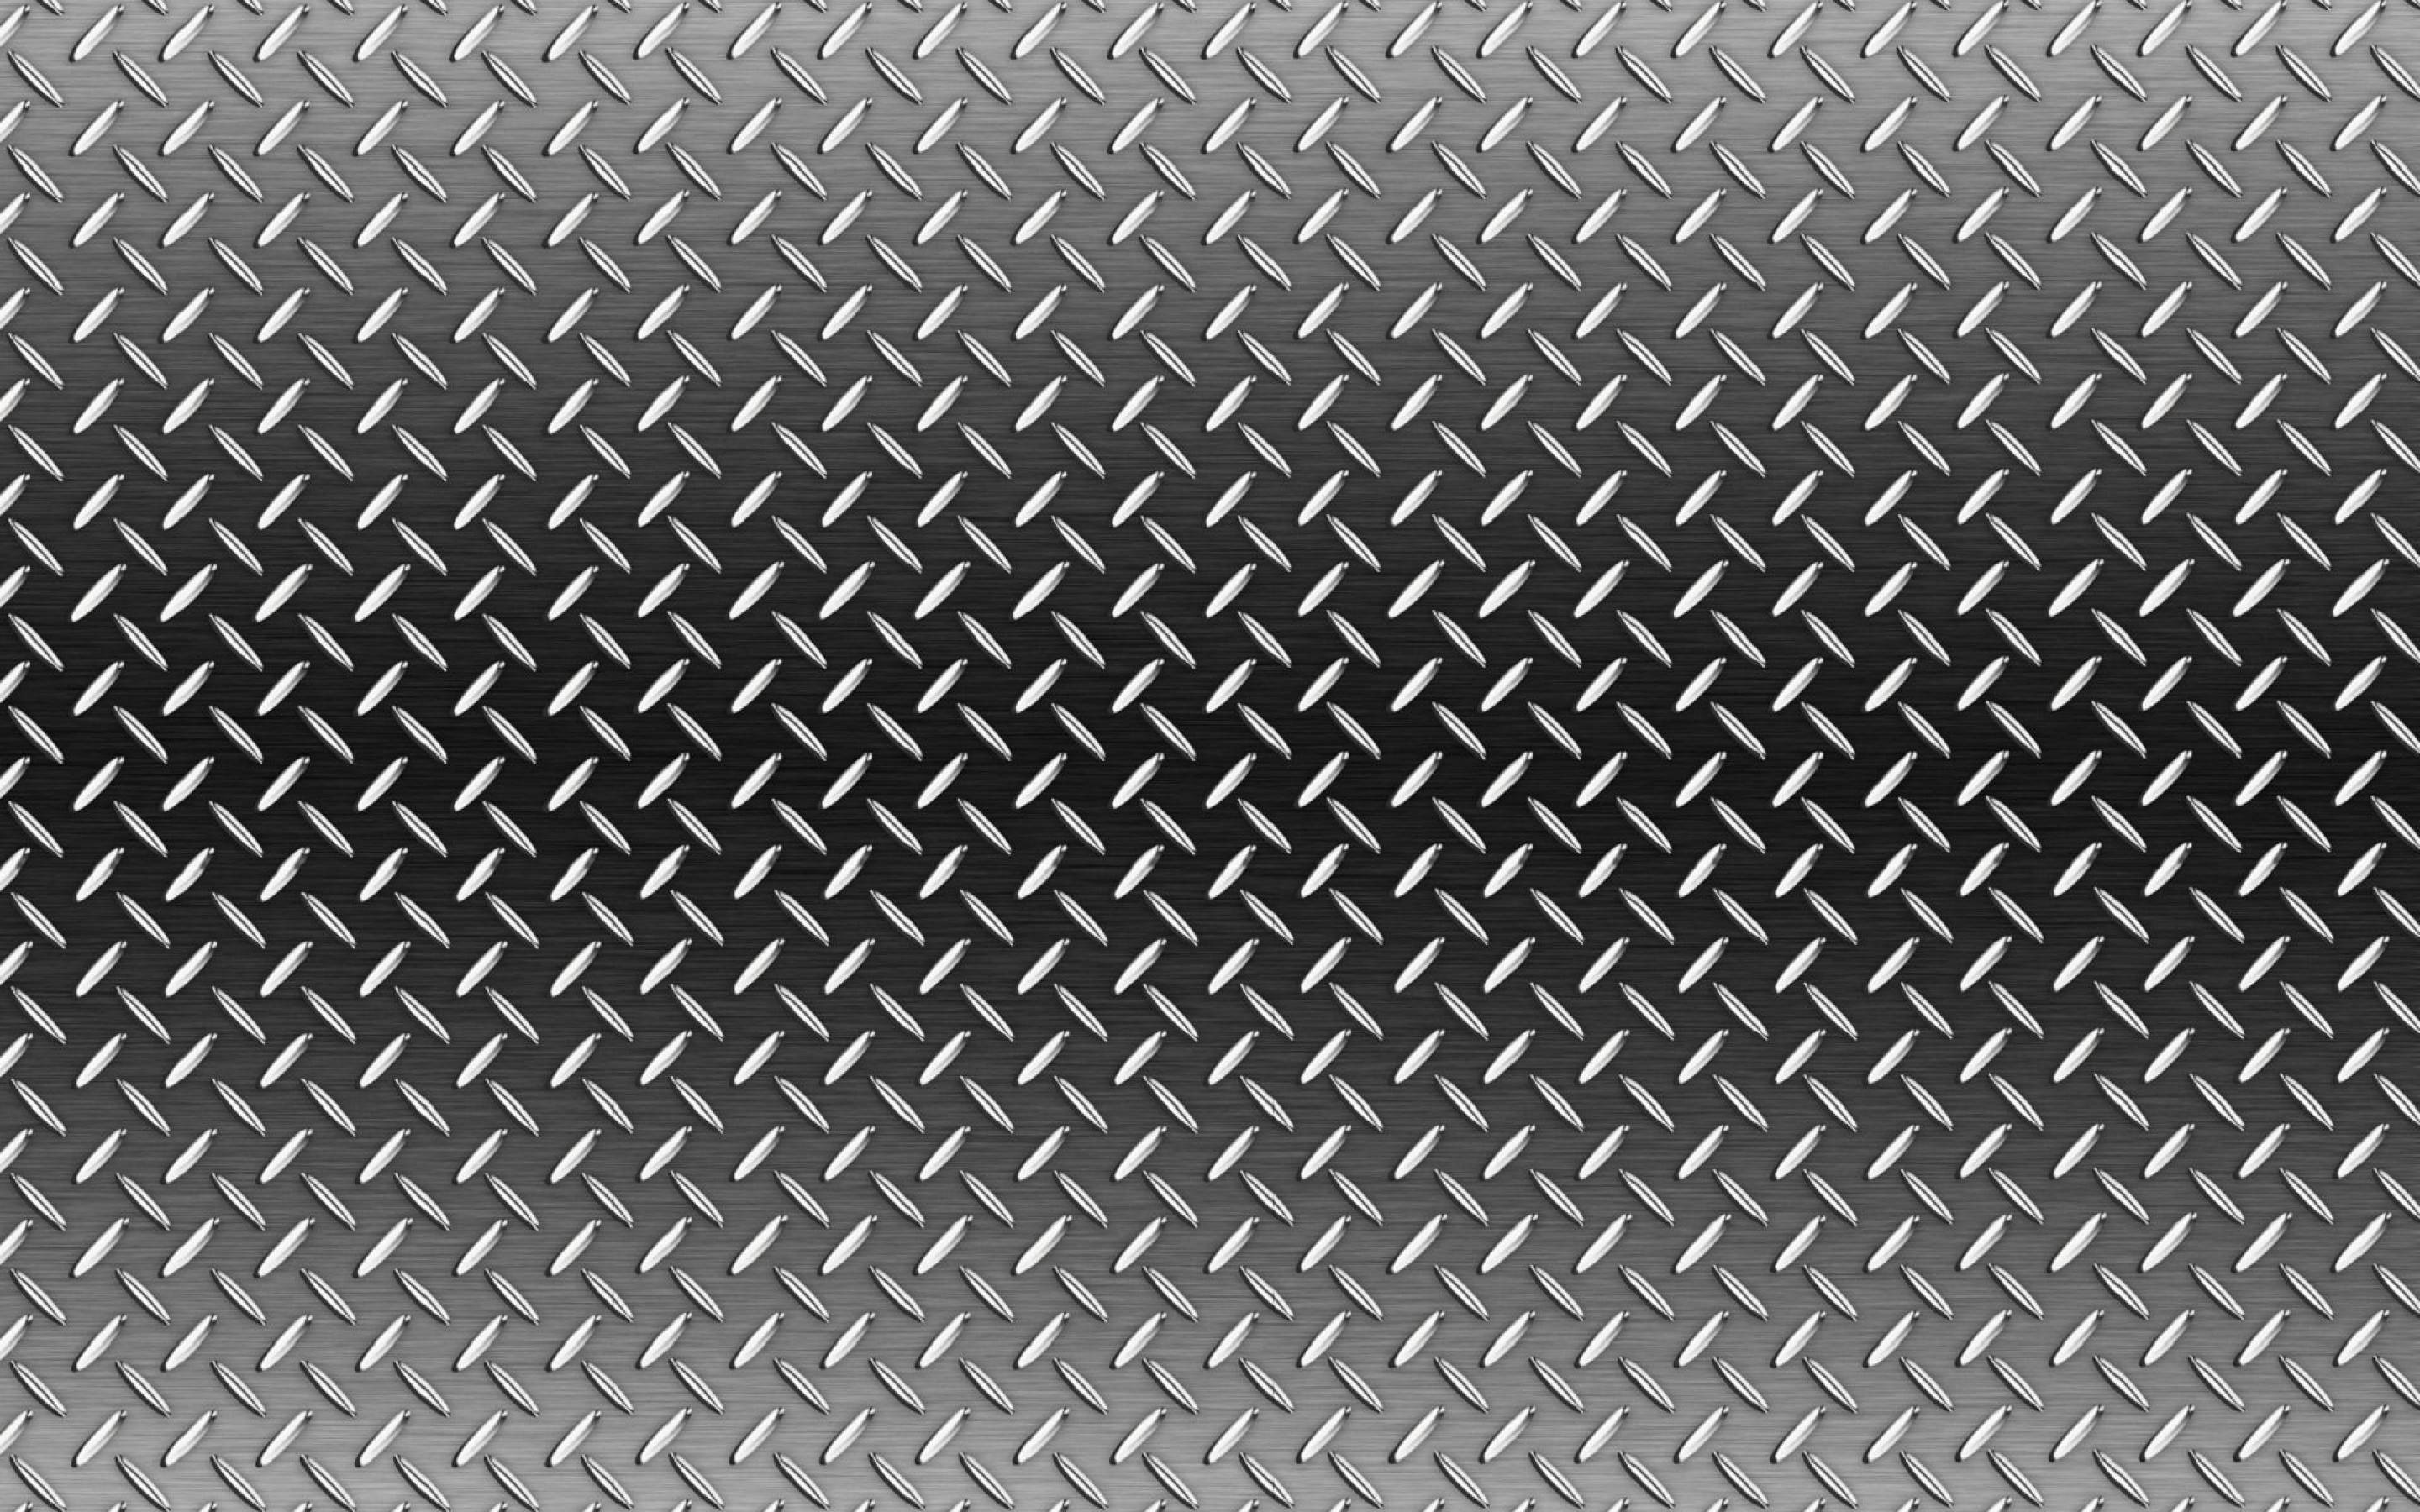 2880x1800 Torn Metal Texture Royalty Free Stock Photo - Image: 20266015